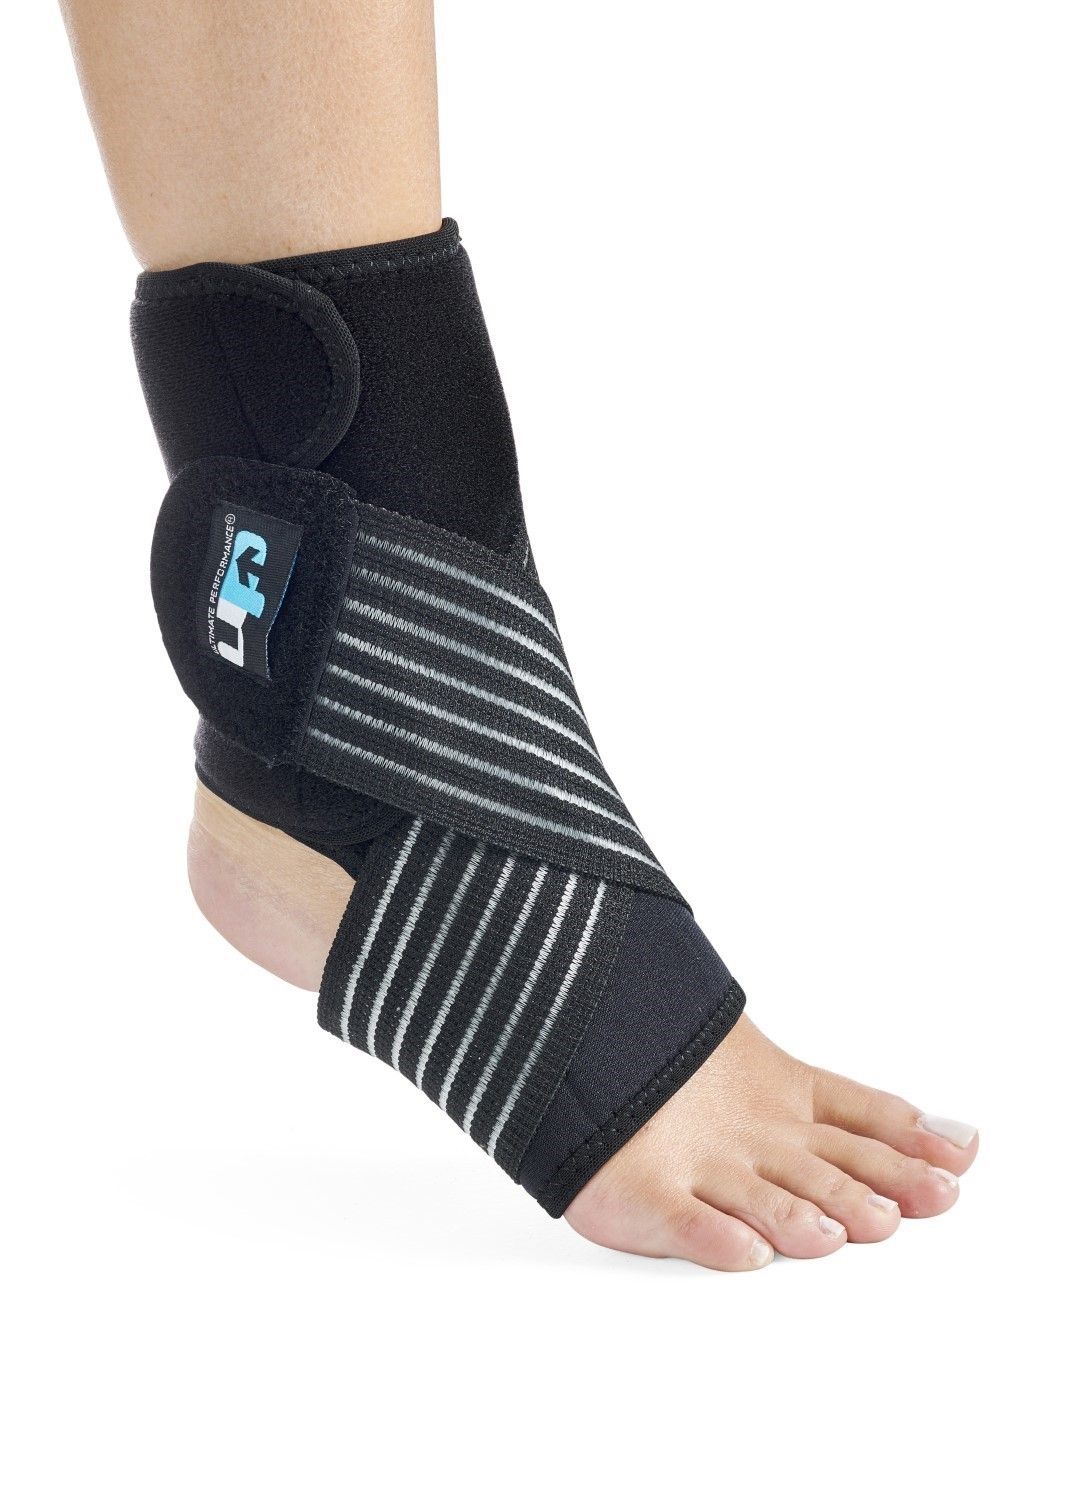 ULTIMATE PERFORMANCE NEOPRENE ANKLE SUPPORT WITH STRAPS / UNIVERSAL photo